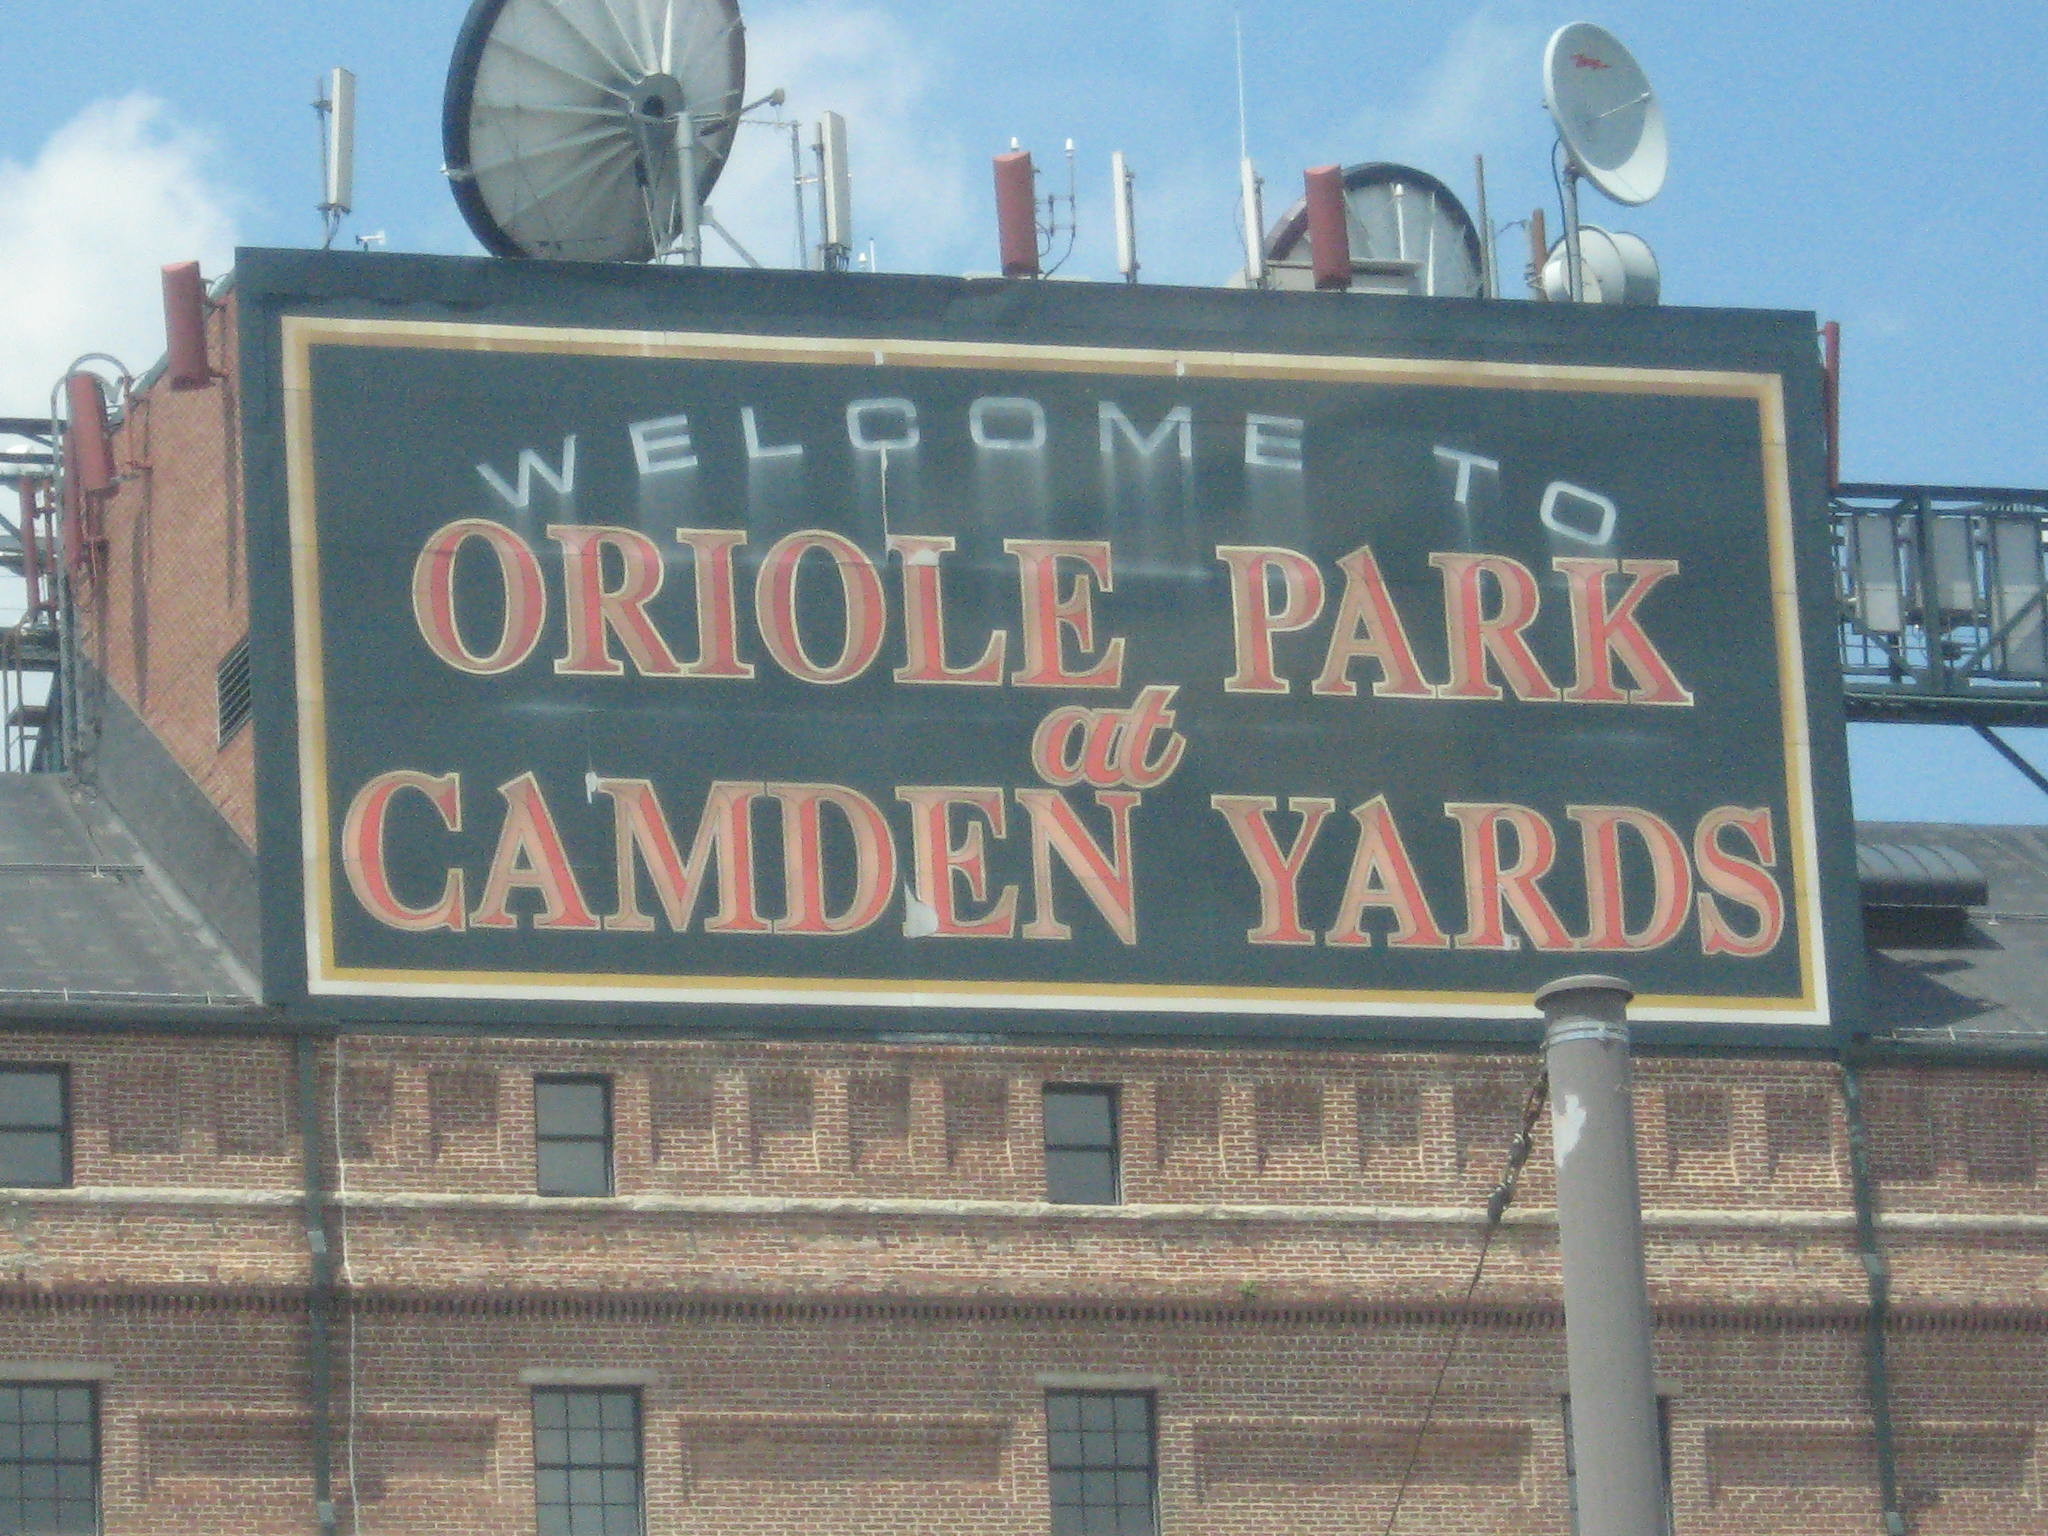 2048x1536 Camden Yards feels old with its brickwork and yet modern with its  conveniences…a great combination in my opinion!